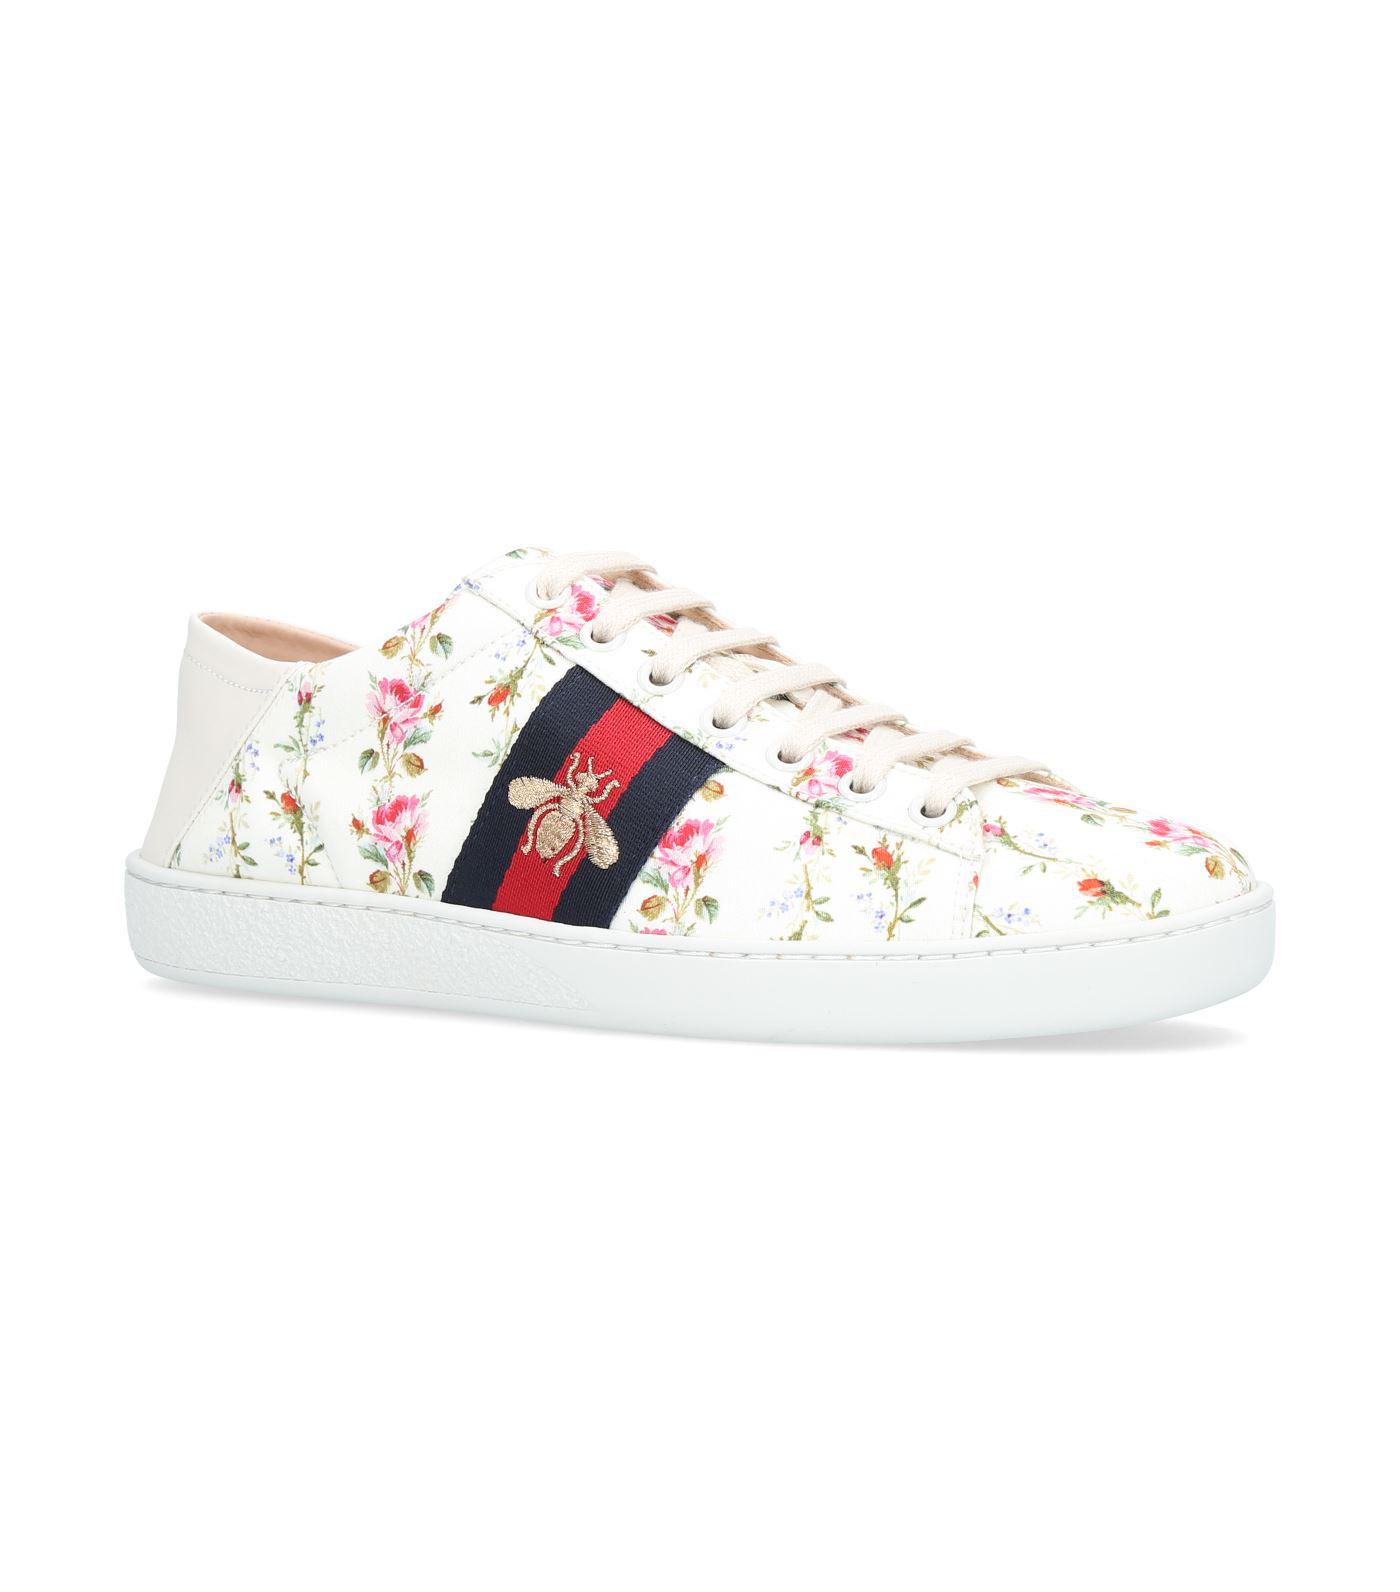 Gucci Ace Rose Print Low-top Sneakers in White | Lyst